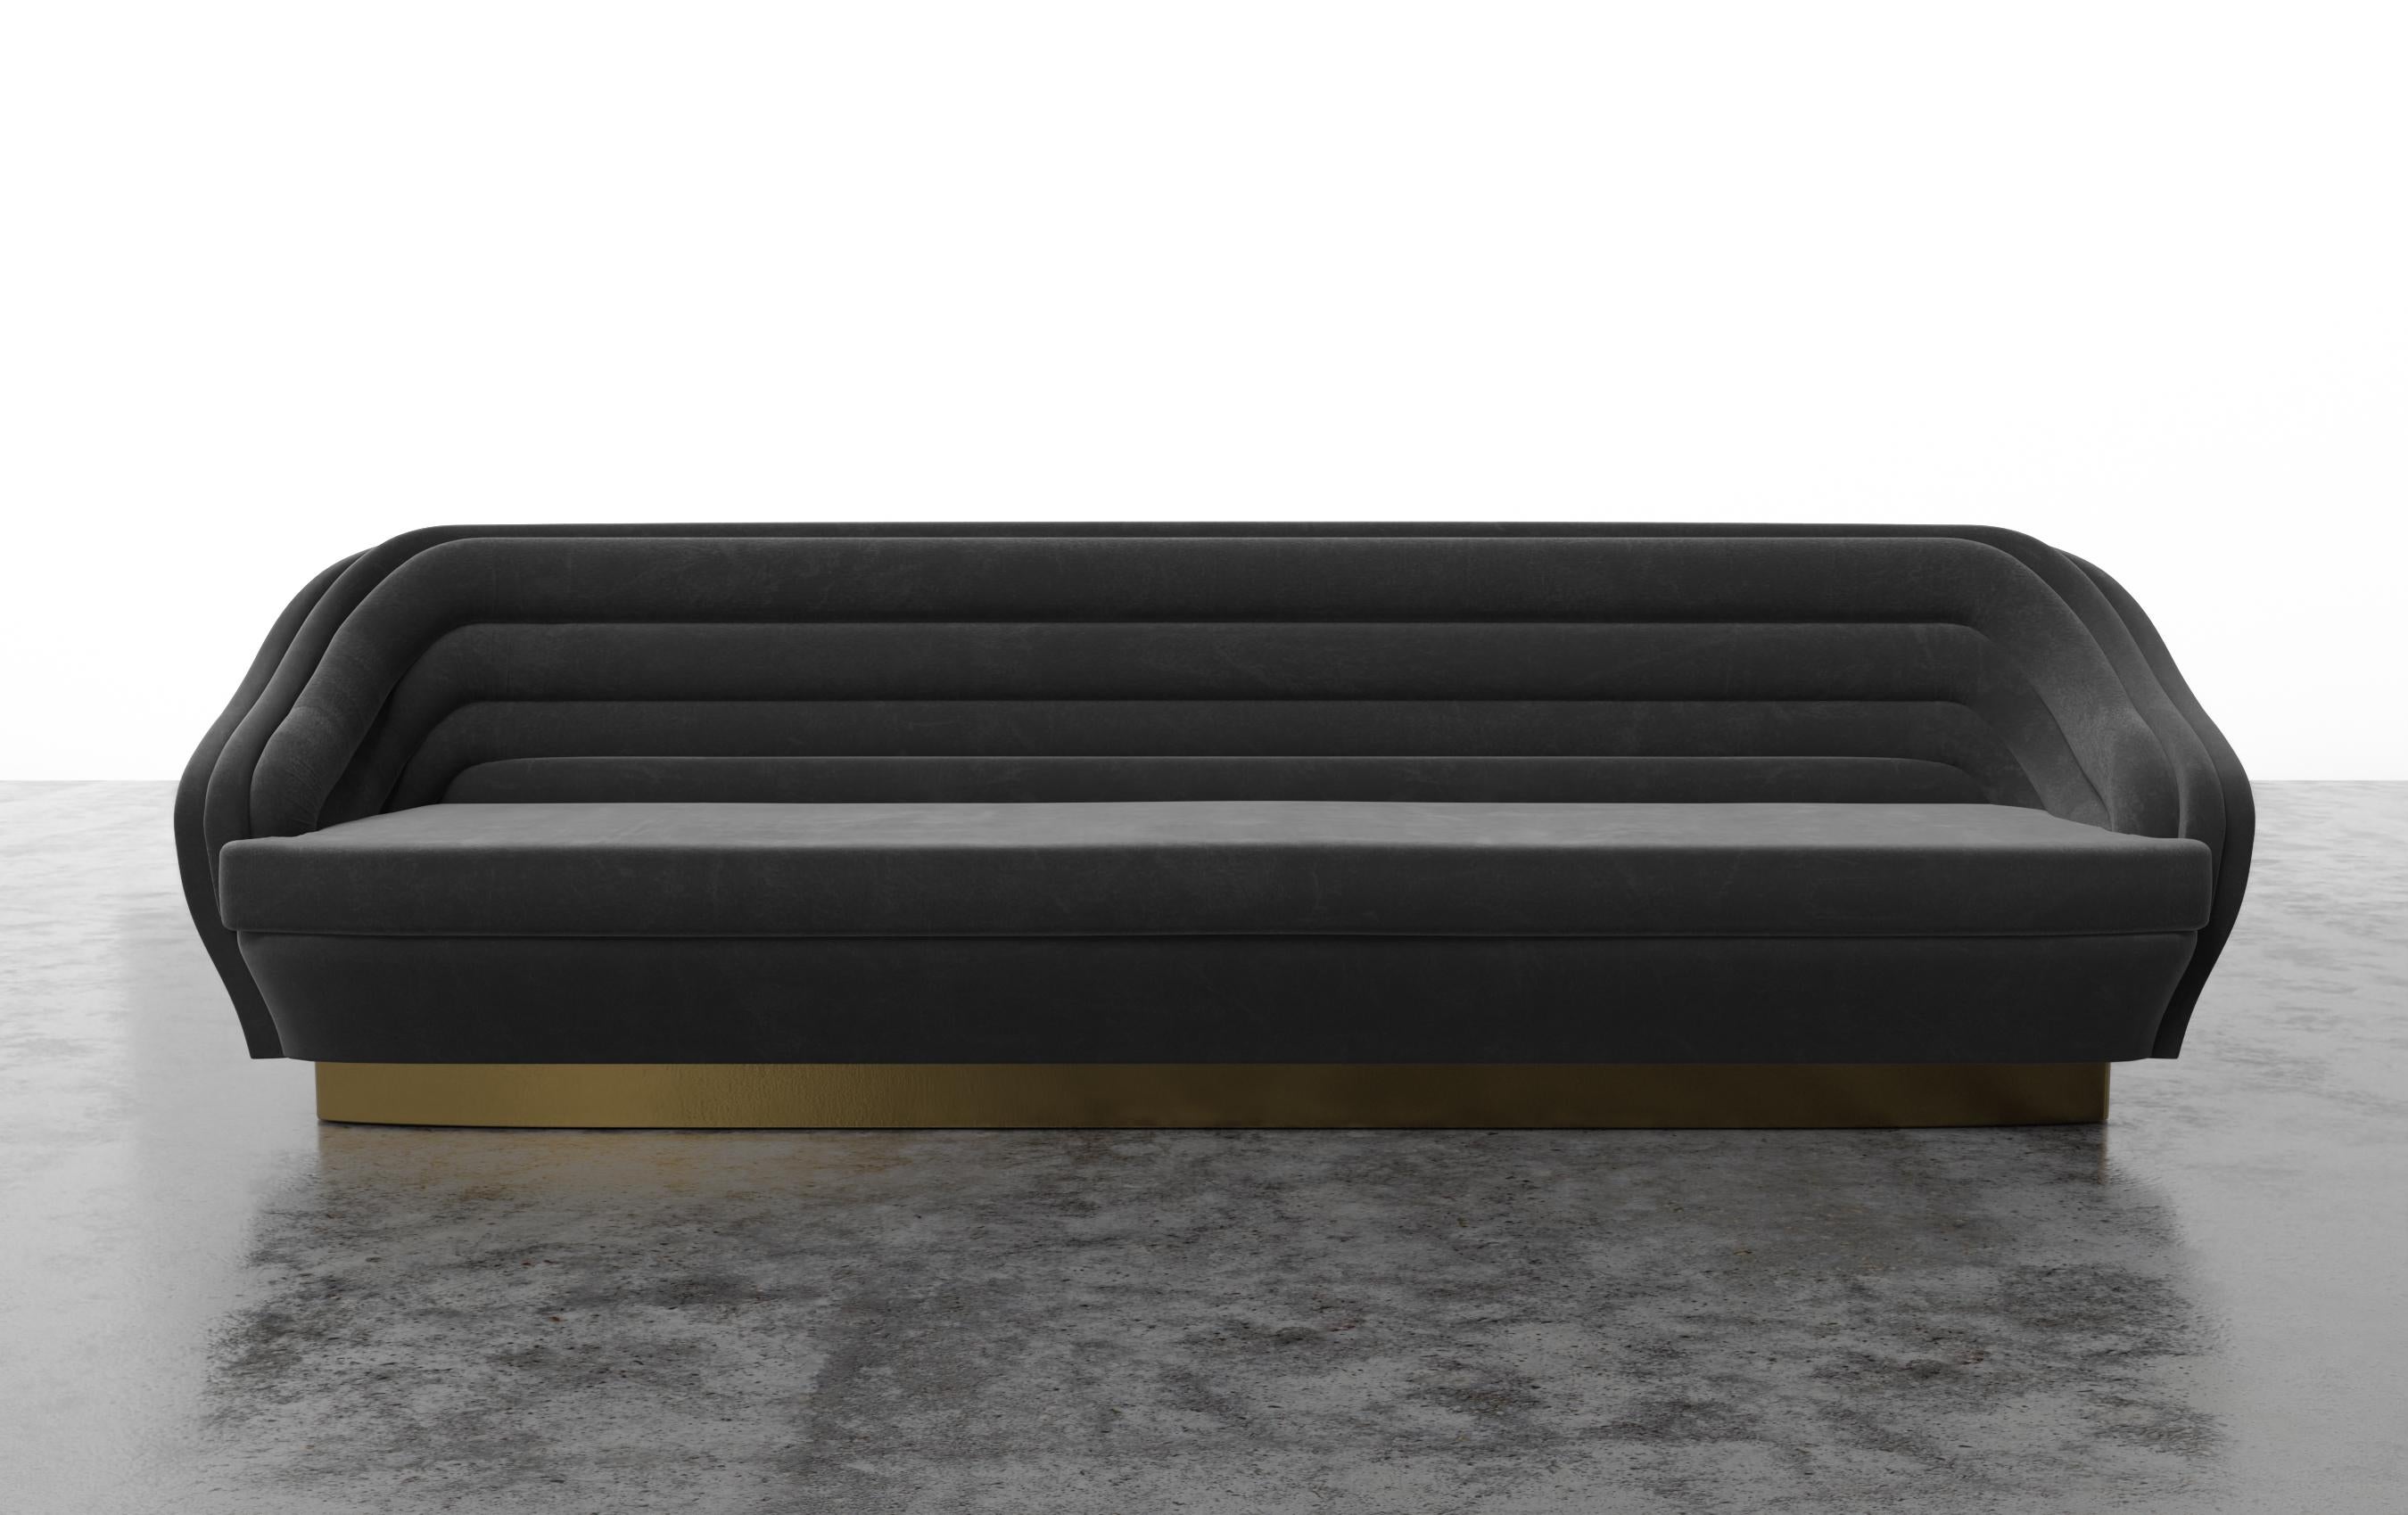 RAOUL SOFA - Modern Channeled Sofa on Brass Plinth Base in COM

The Raoul sofa sounds like a luxurious and stylish piece of furniture that draws inspiration from Jean Paul Gaultier Haute Couture. The horizontal velvet channels and brushed brass